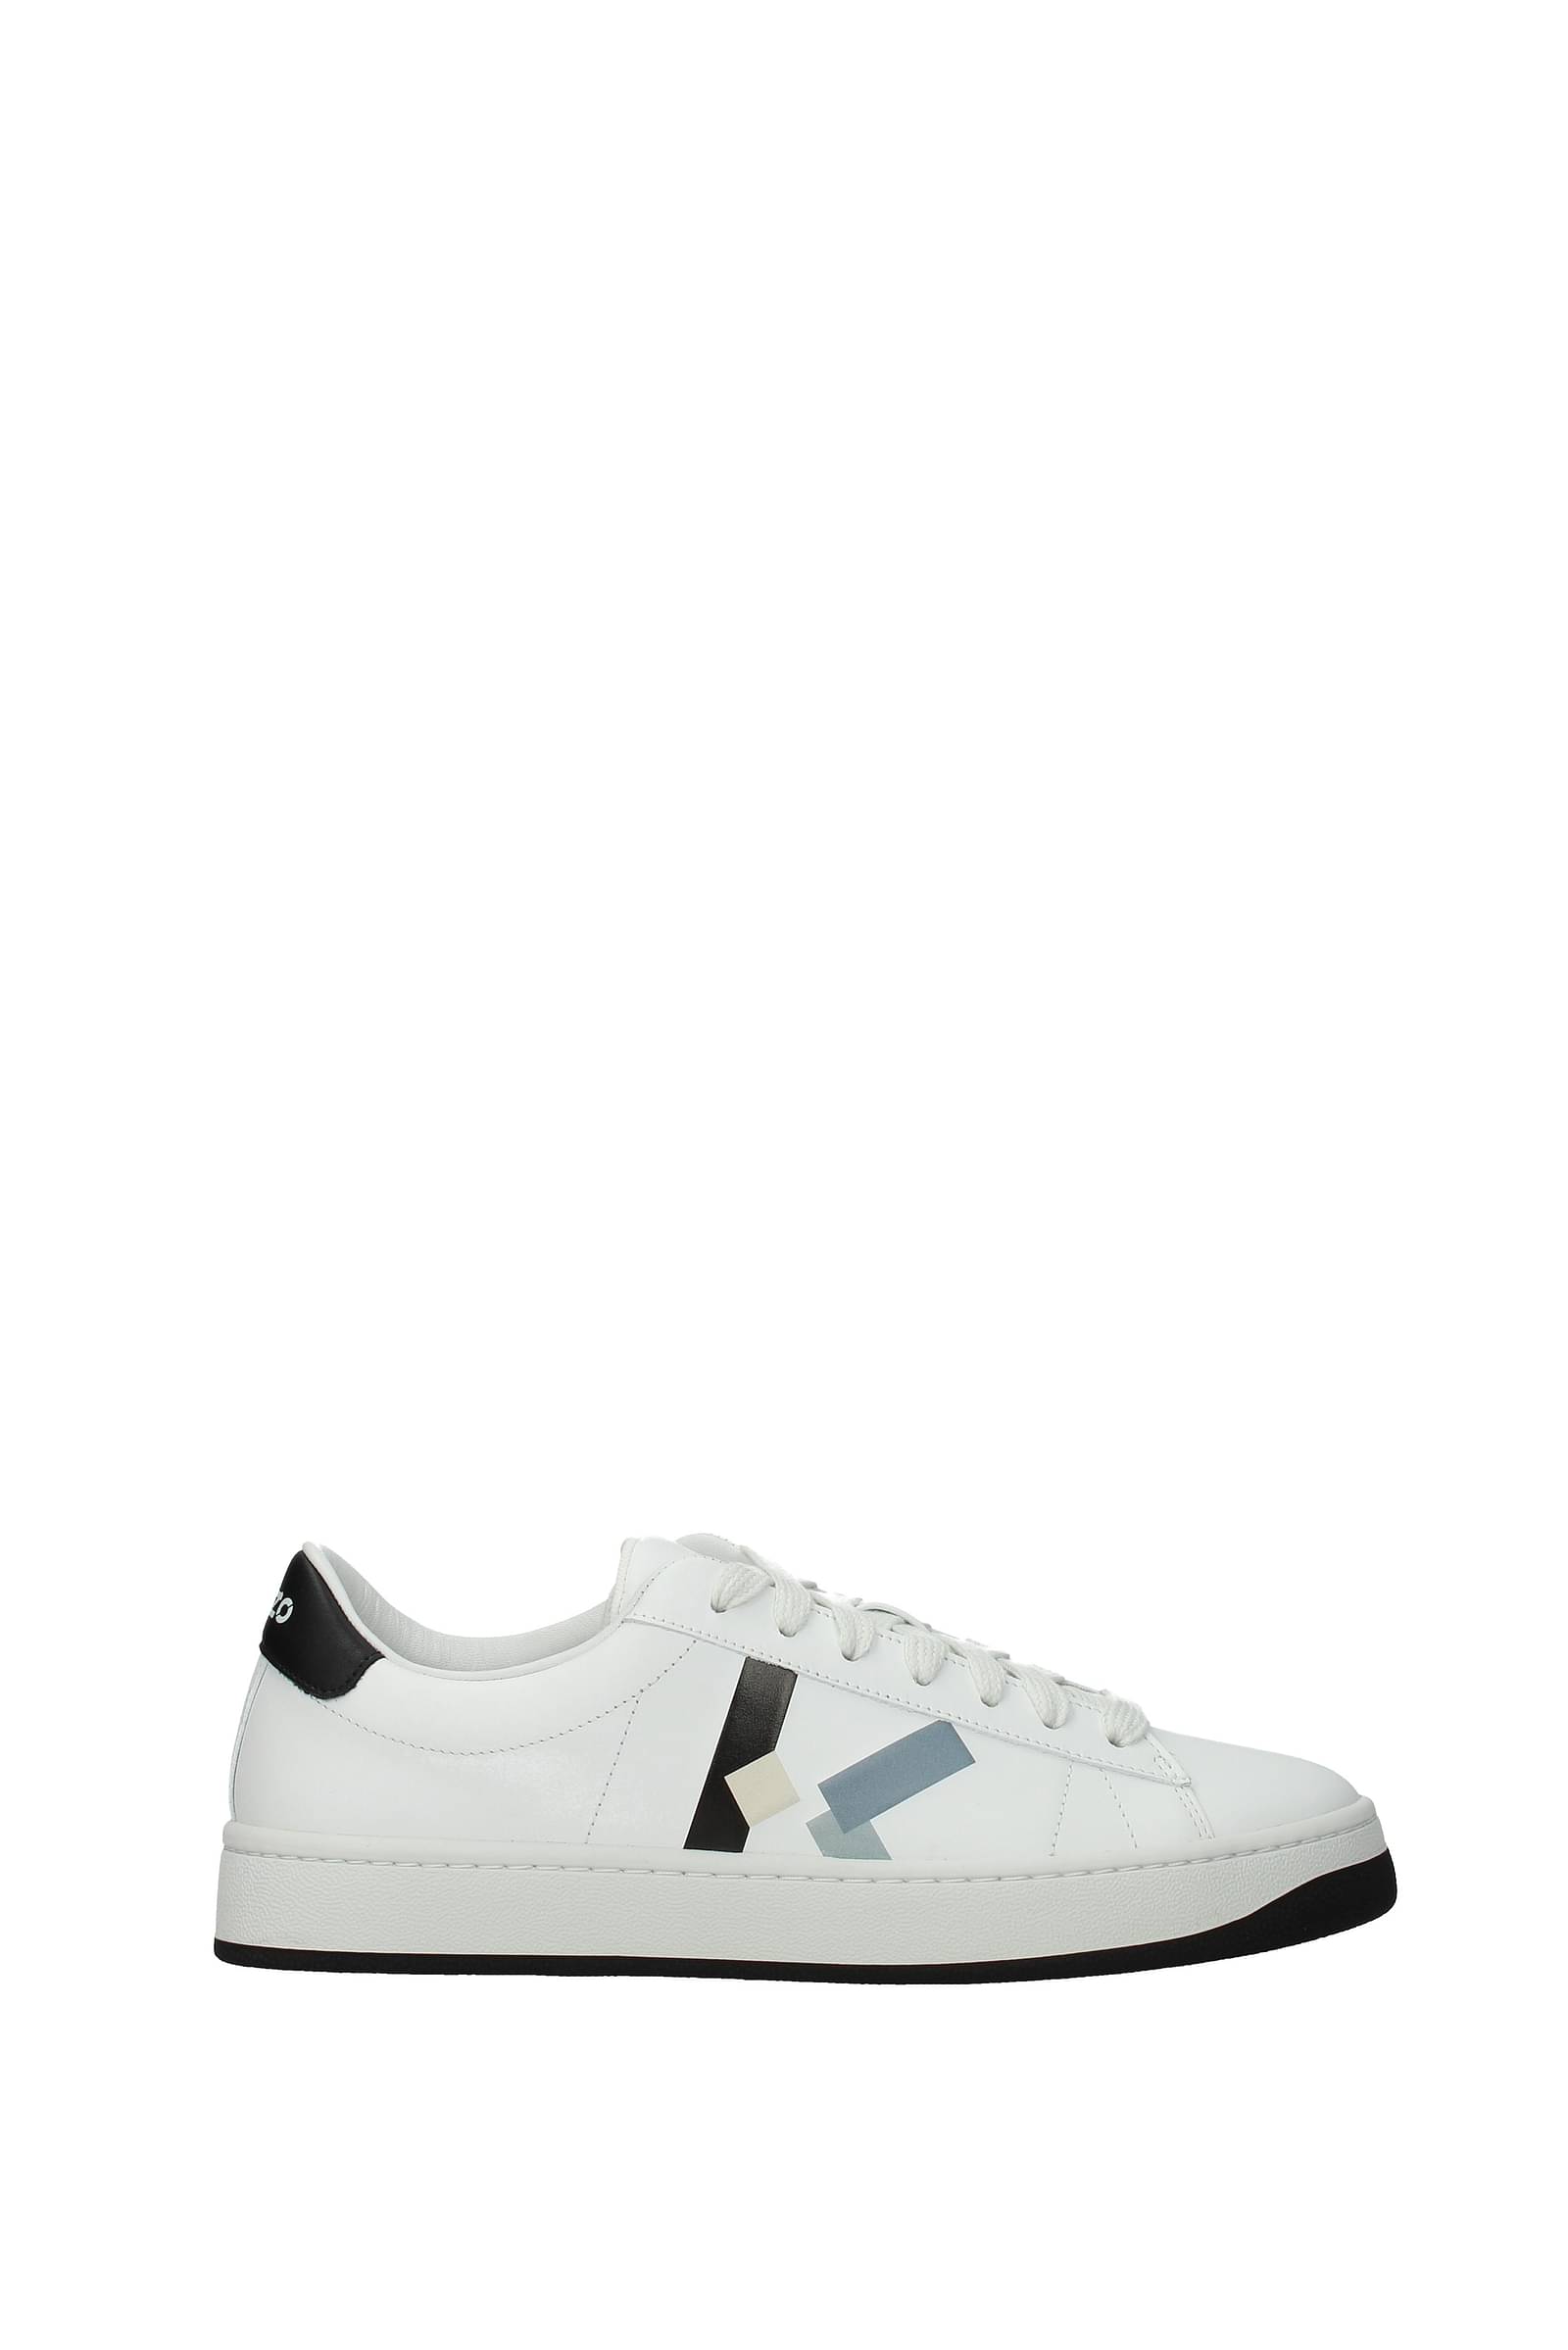 Buy Kenzo Black Printed Sneaker Online - 418736 | The Collective